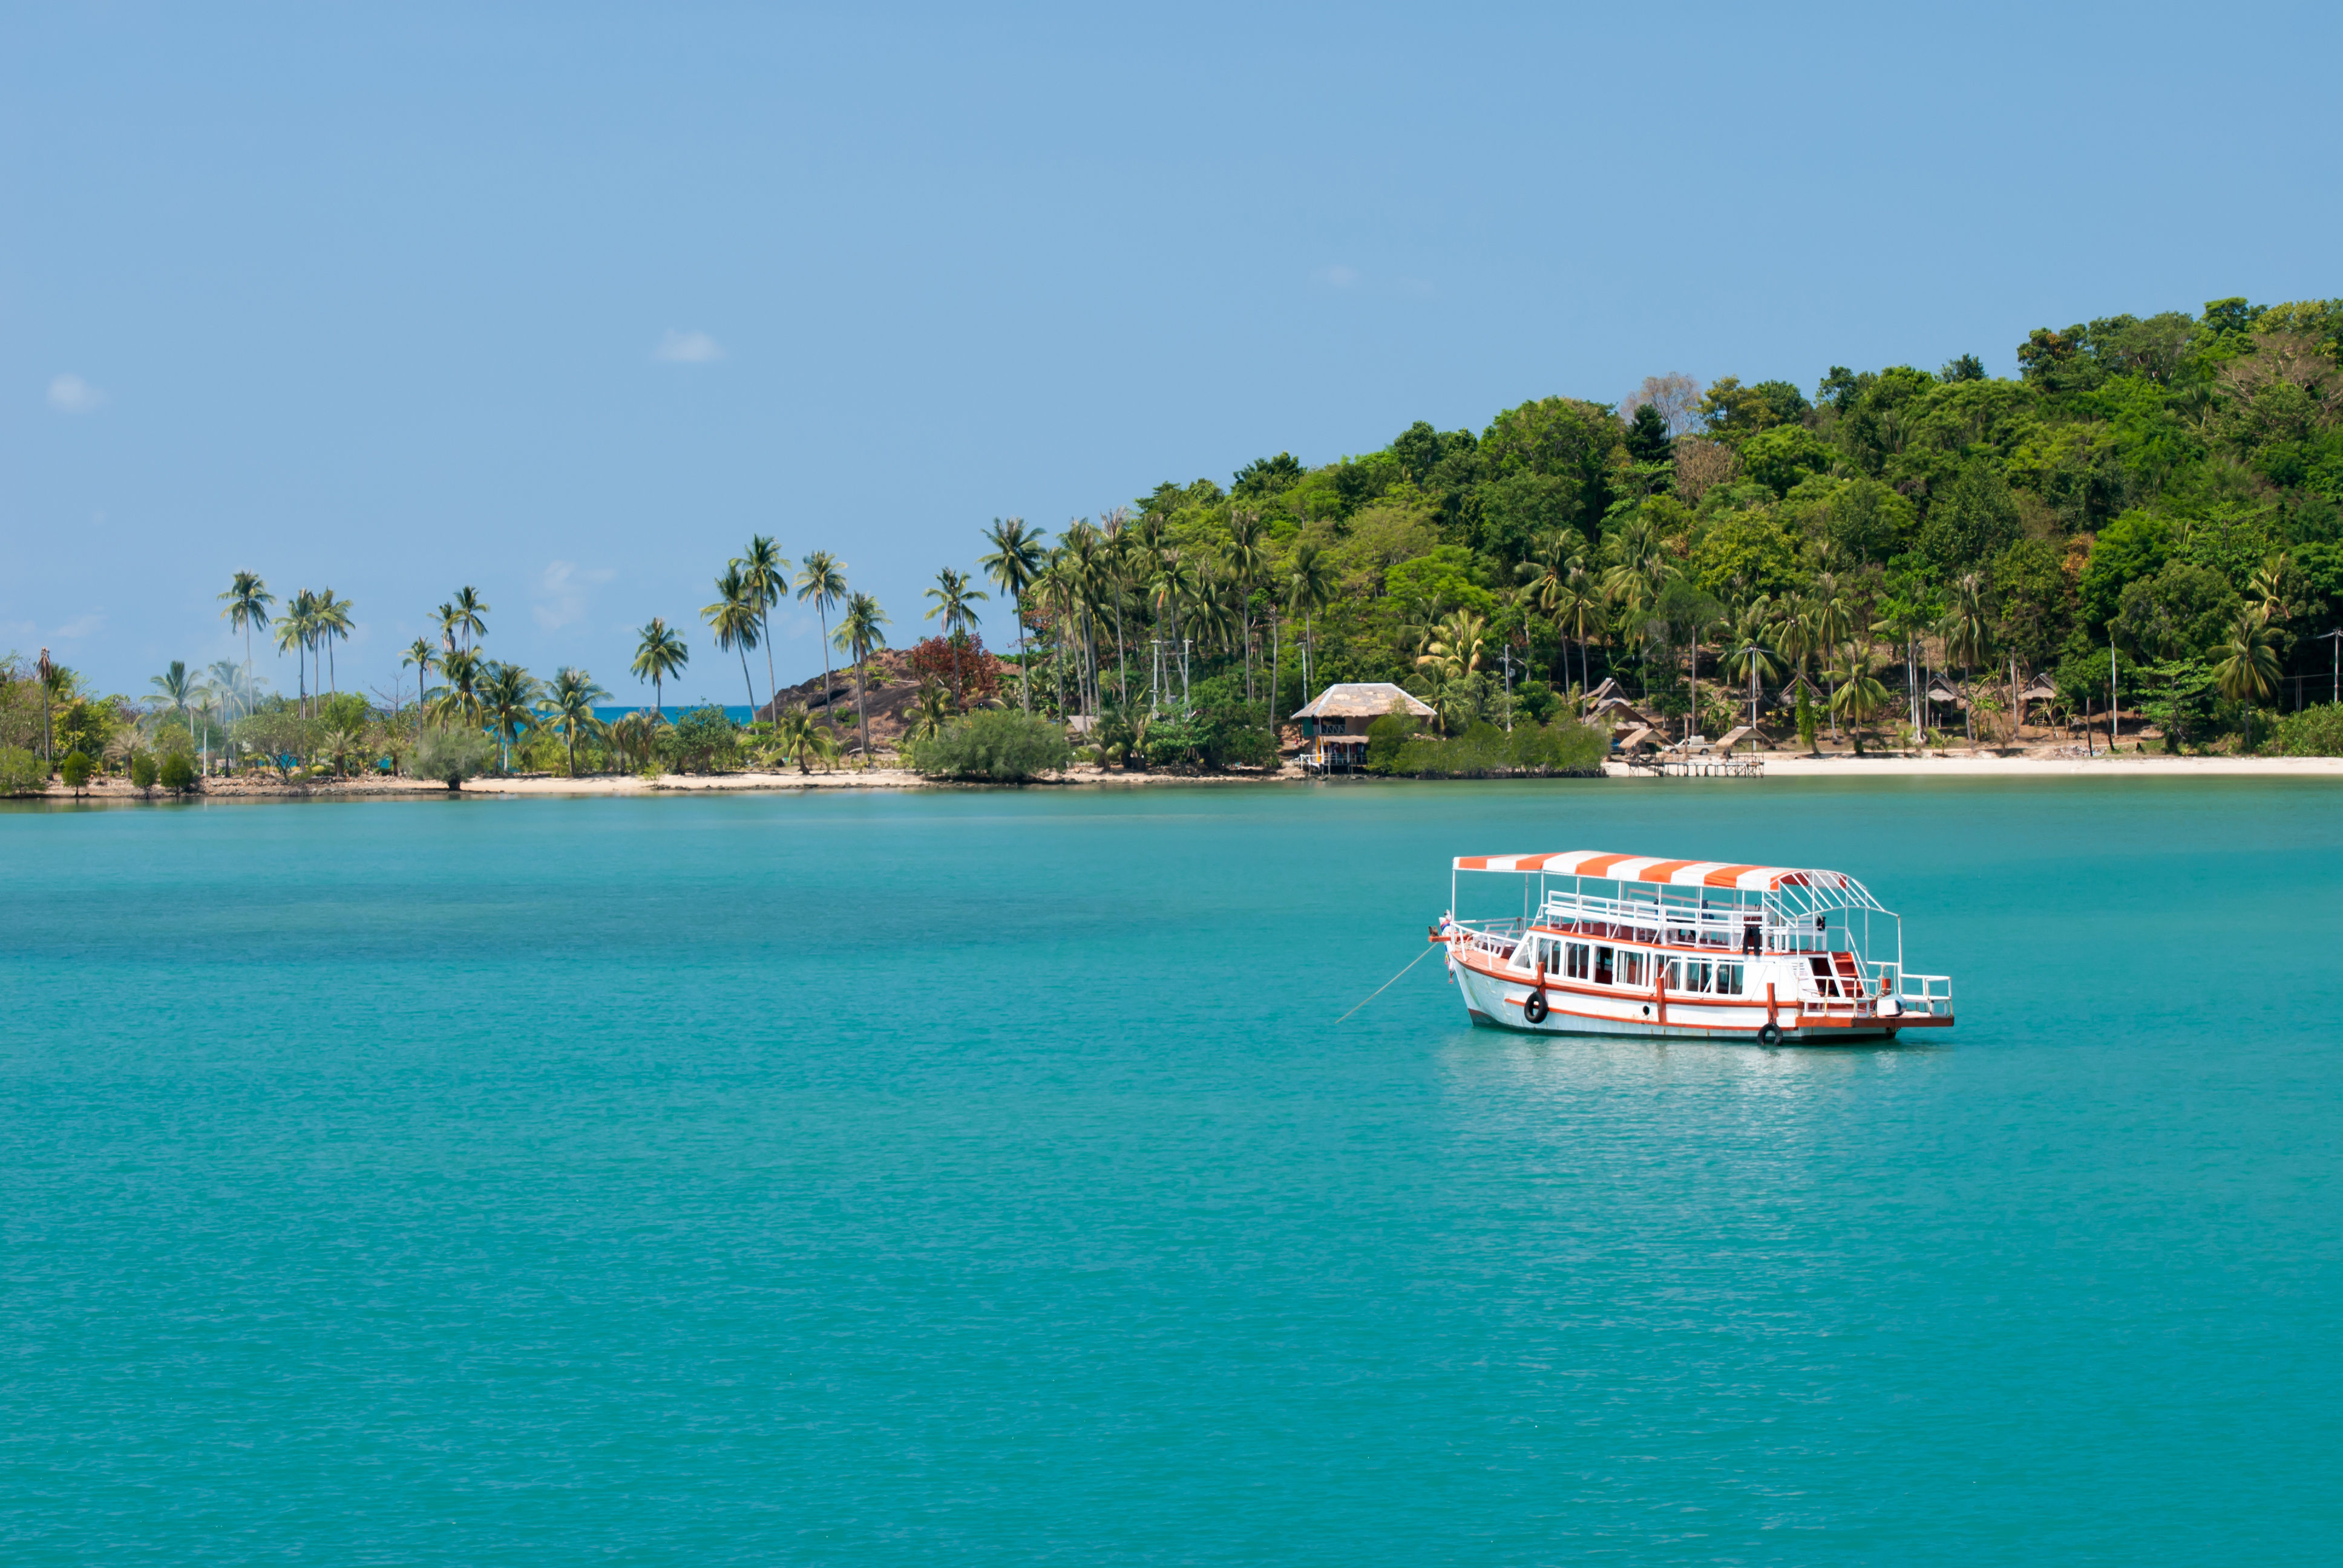 Tour boat sailing on turquoise waters near white sand beach and palm trees in Koh Chang Island.